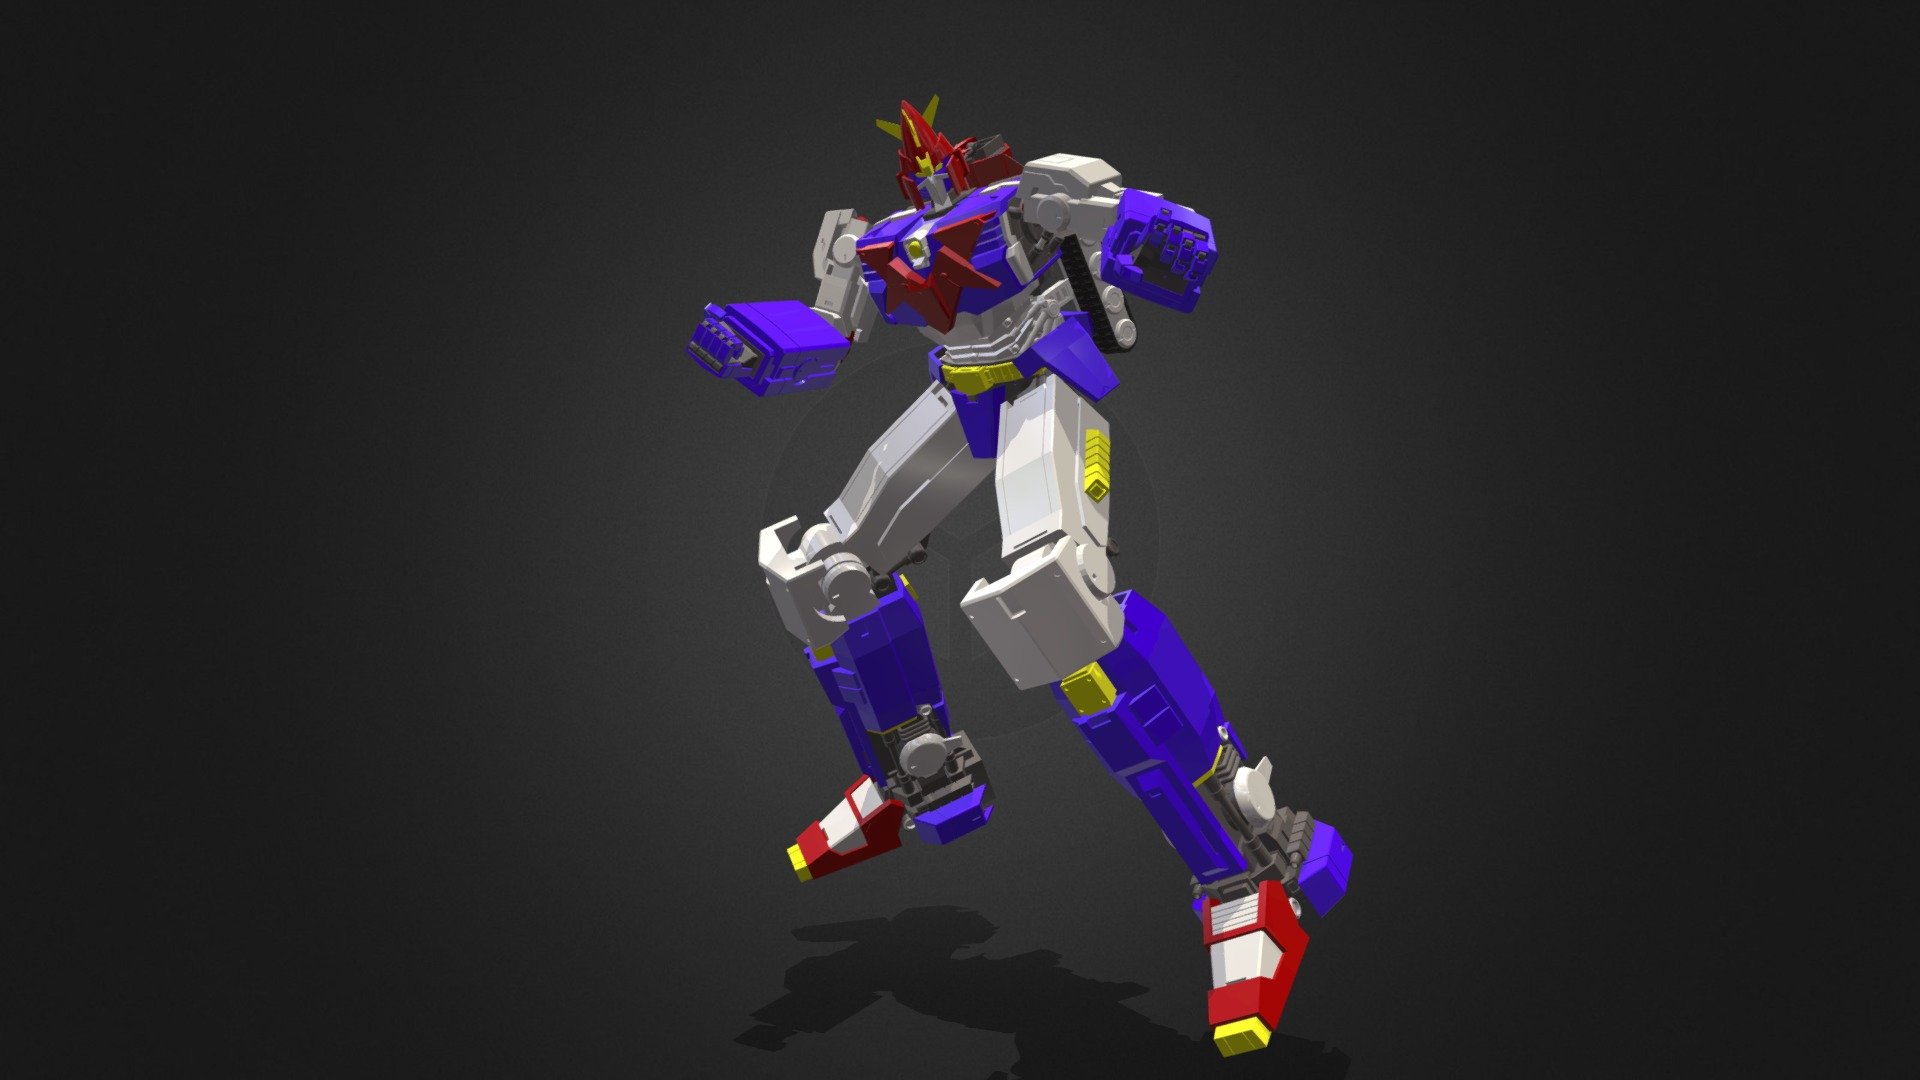 Commissioned by lootBOX+

artwork by Nats Ledesma

3d modelling by yours truly Arnesto Barraca

Super Electromagnetic Machine Voltes V (Japanese: 超電磁マシーン ボルテスVファイブ, Hepburn: Chōdenji Mashīn Borutesu Faibu), popularly known as simply Voltes V (pronounced as &ldquo;Voltes Five